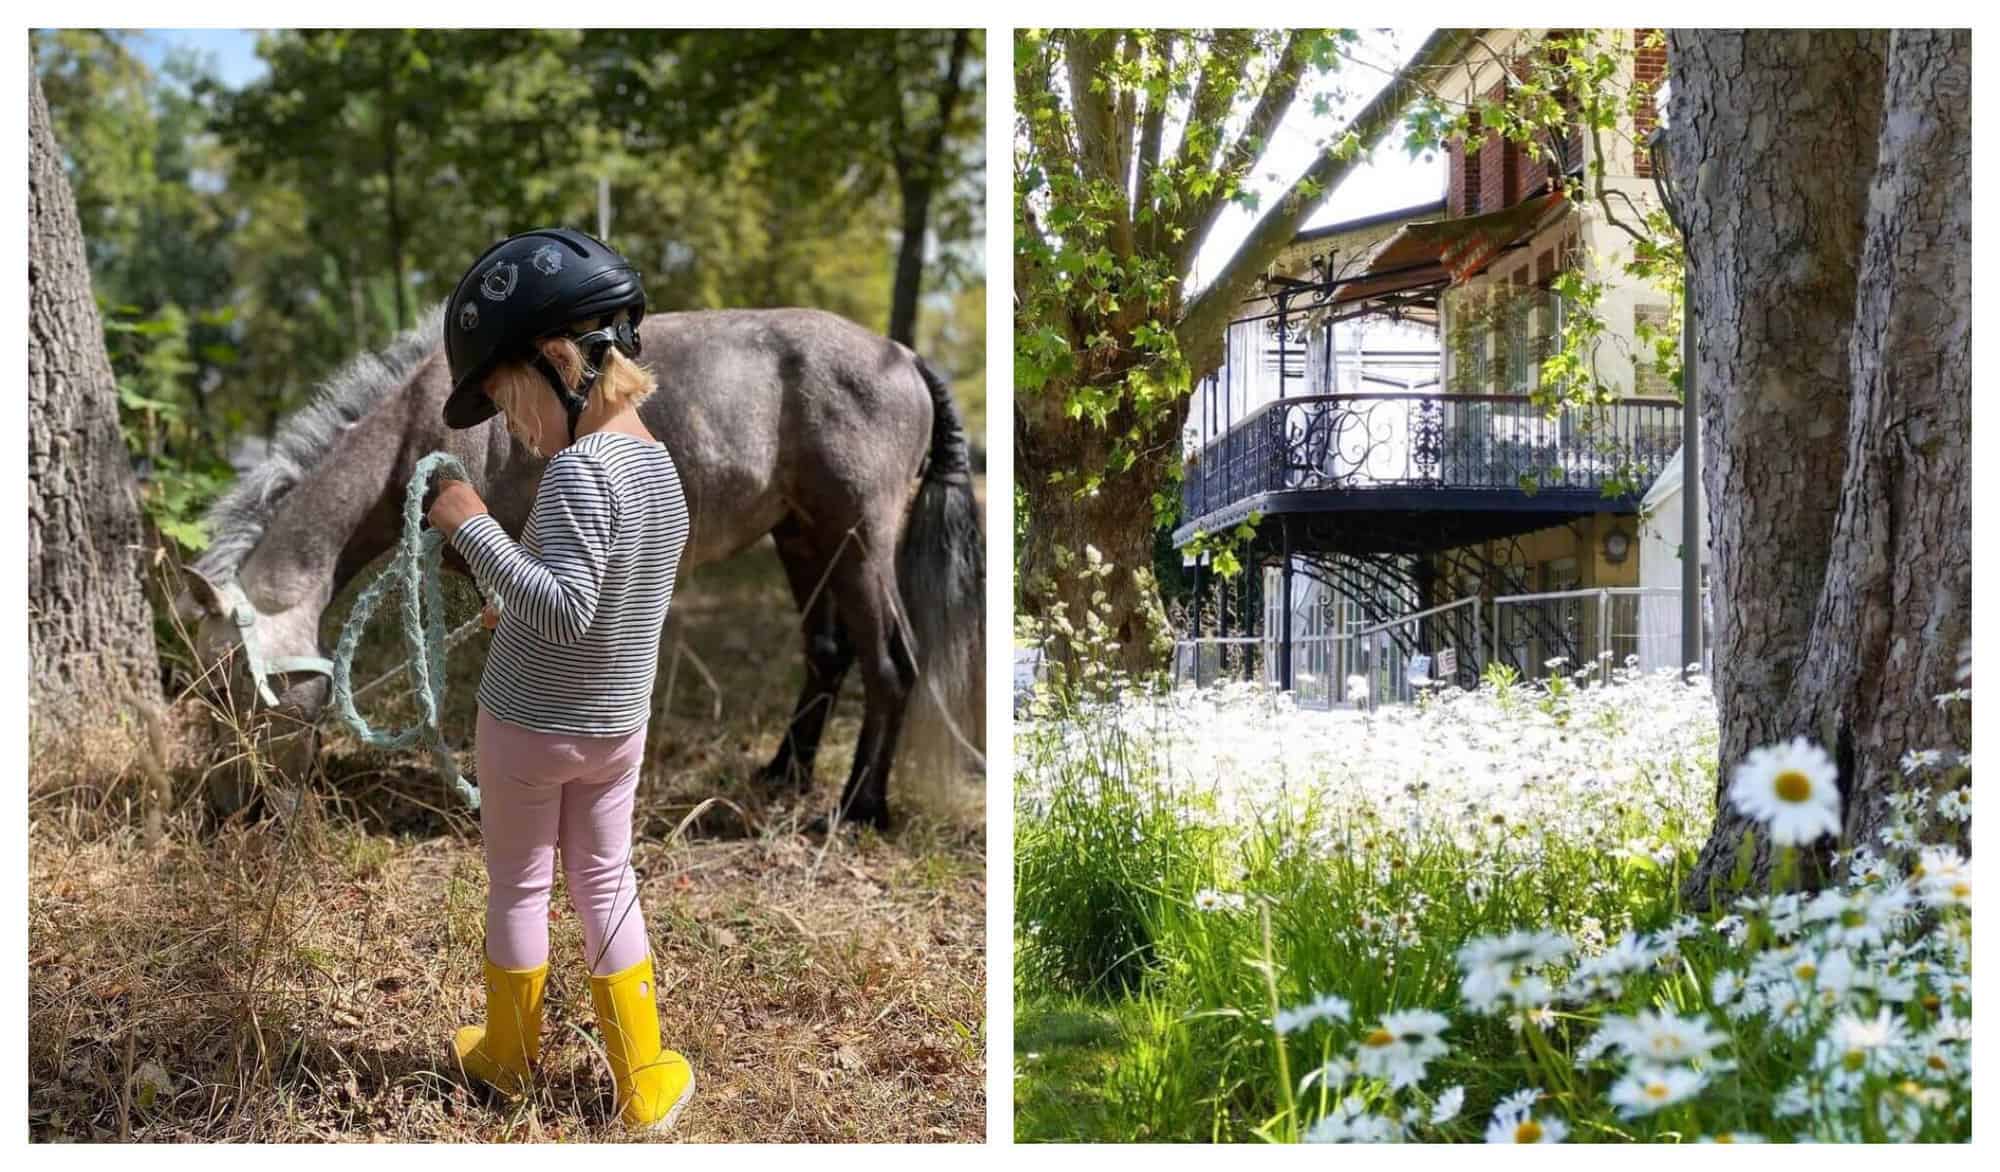 On the left is a young blonde girl in striped shirt, pink pants, and yellow boots holding a green rope of her brown poney. On the right is a house with a terrace seen from a garden full of white flowers and 2 tall trees.